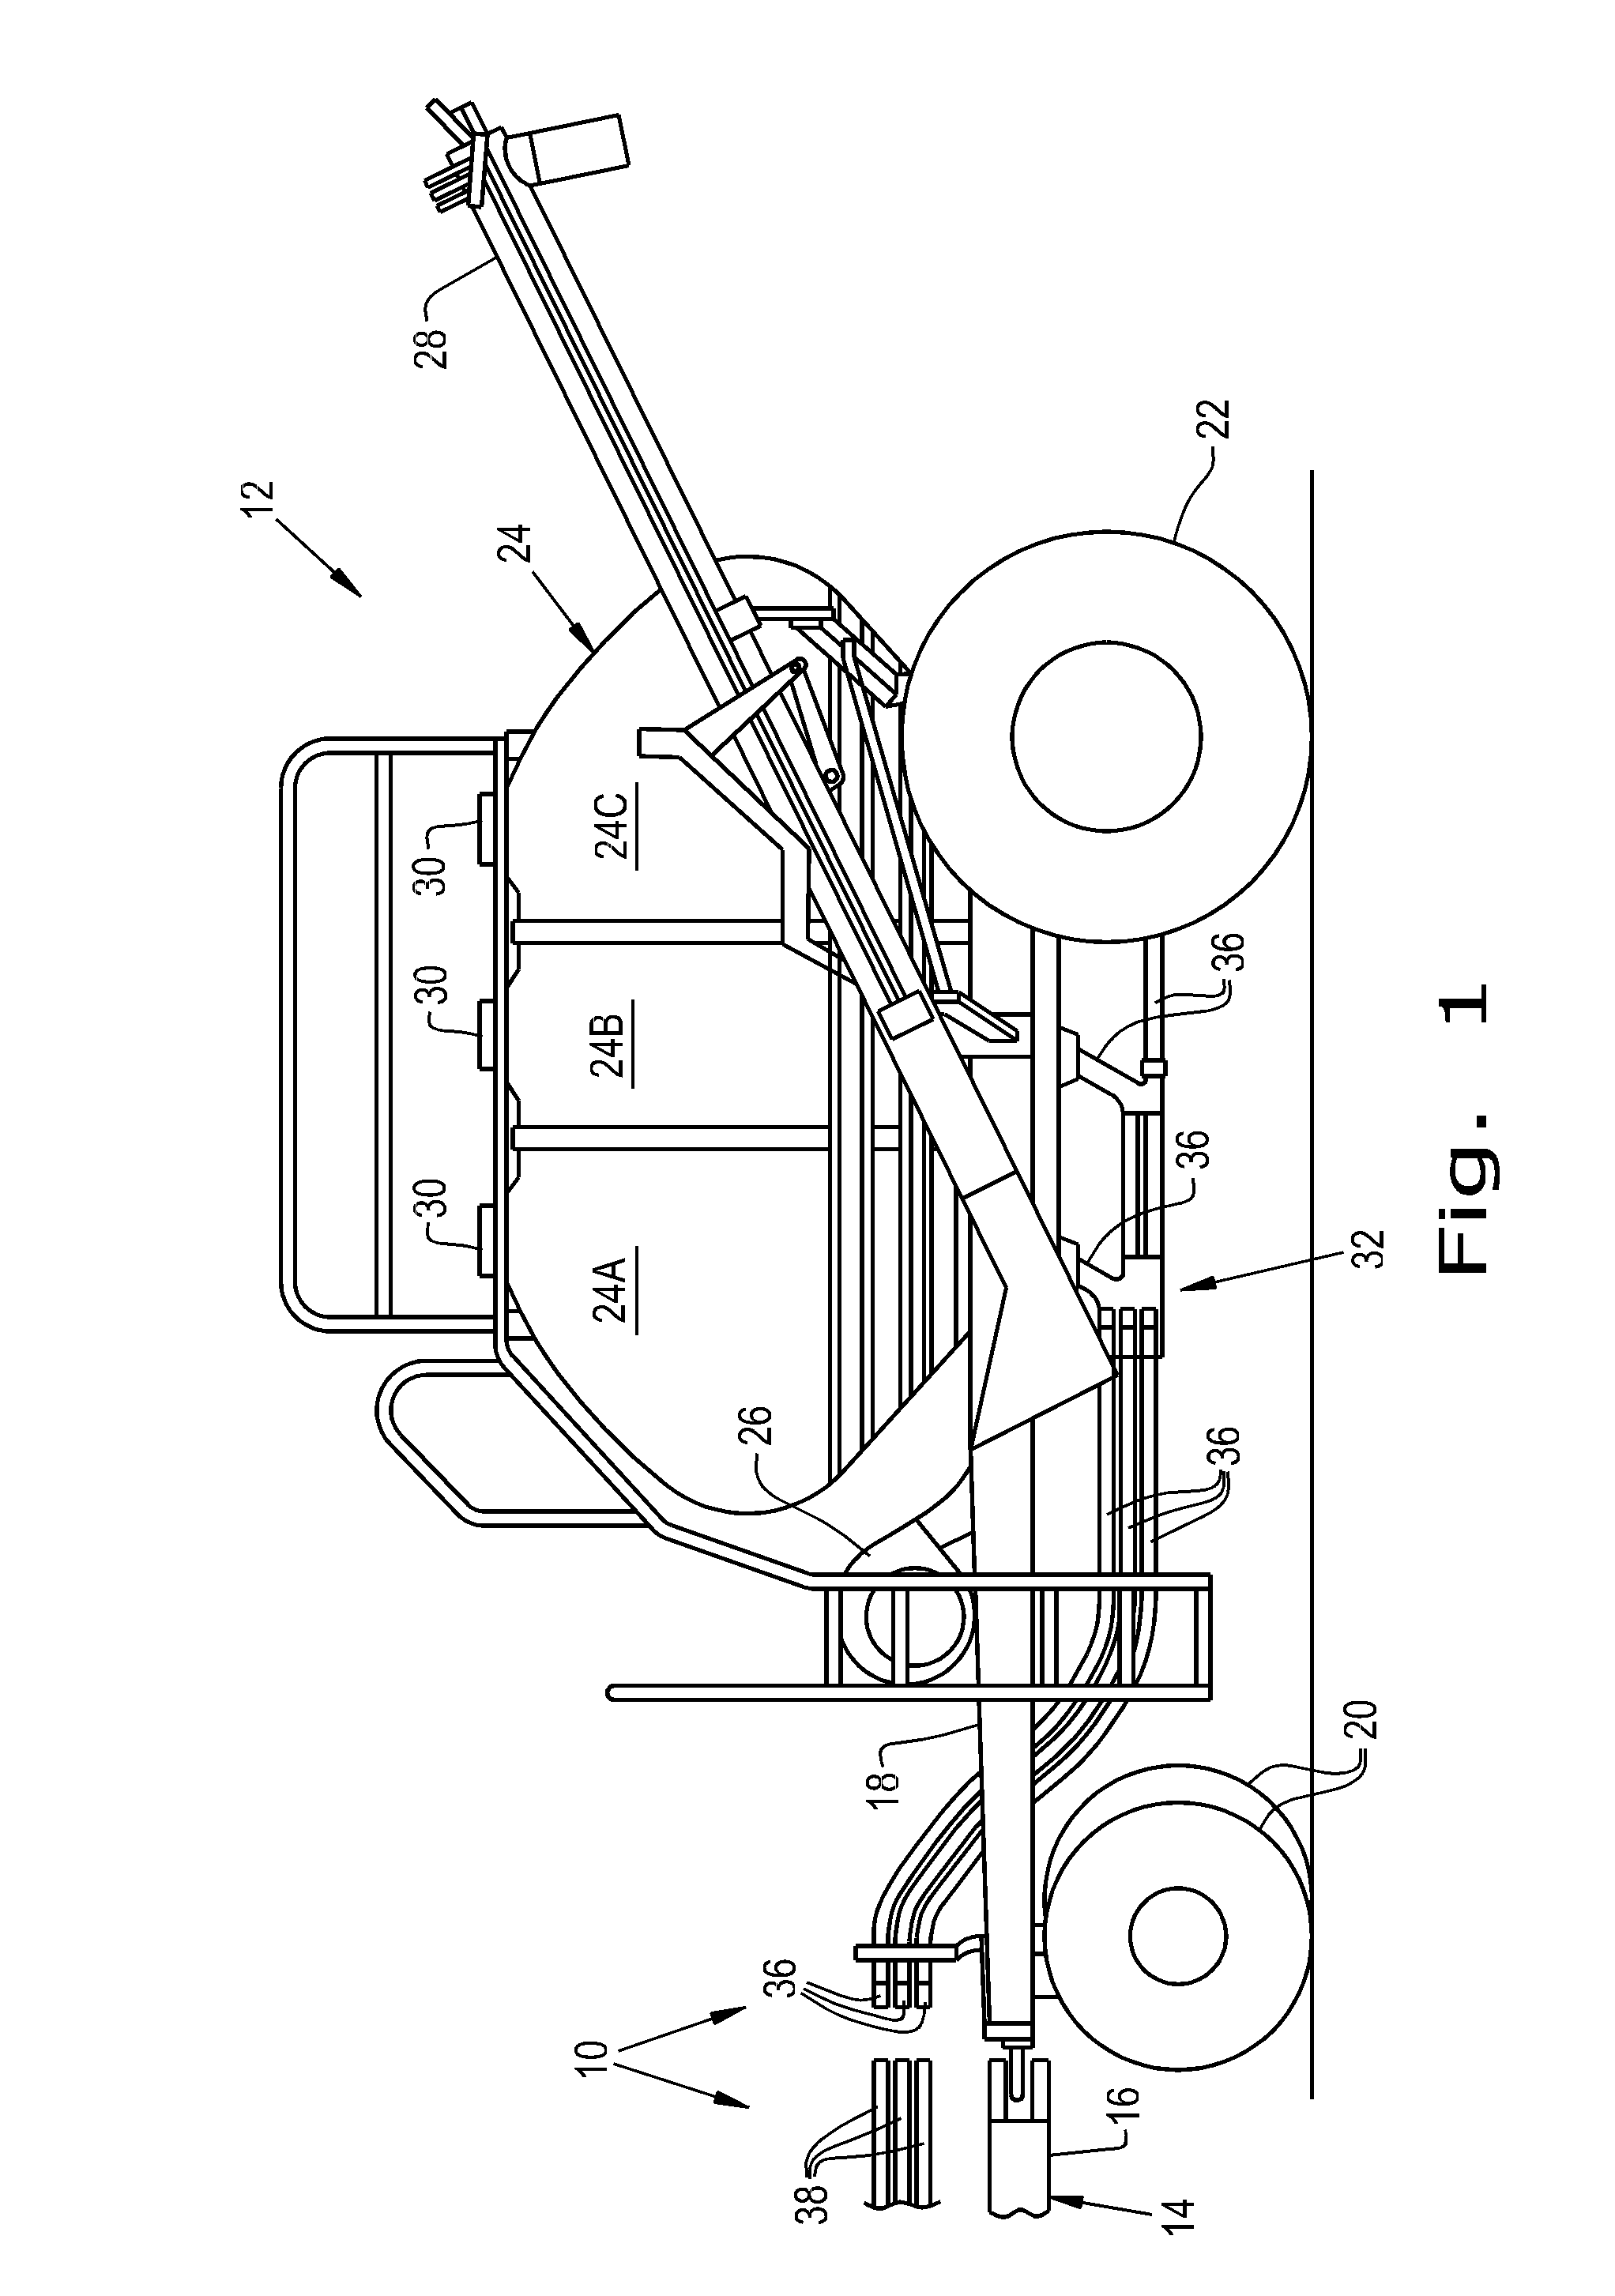 Semi-empirical mass flow model and calibration method for undeveloped flow regions in an air seeder